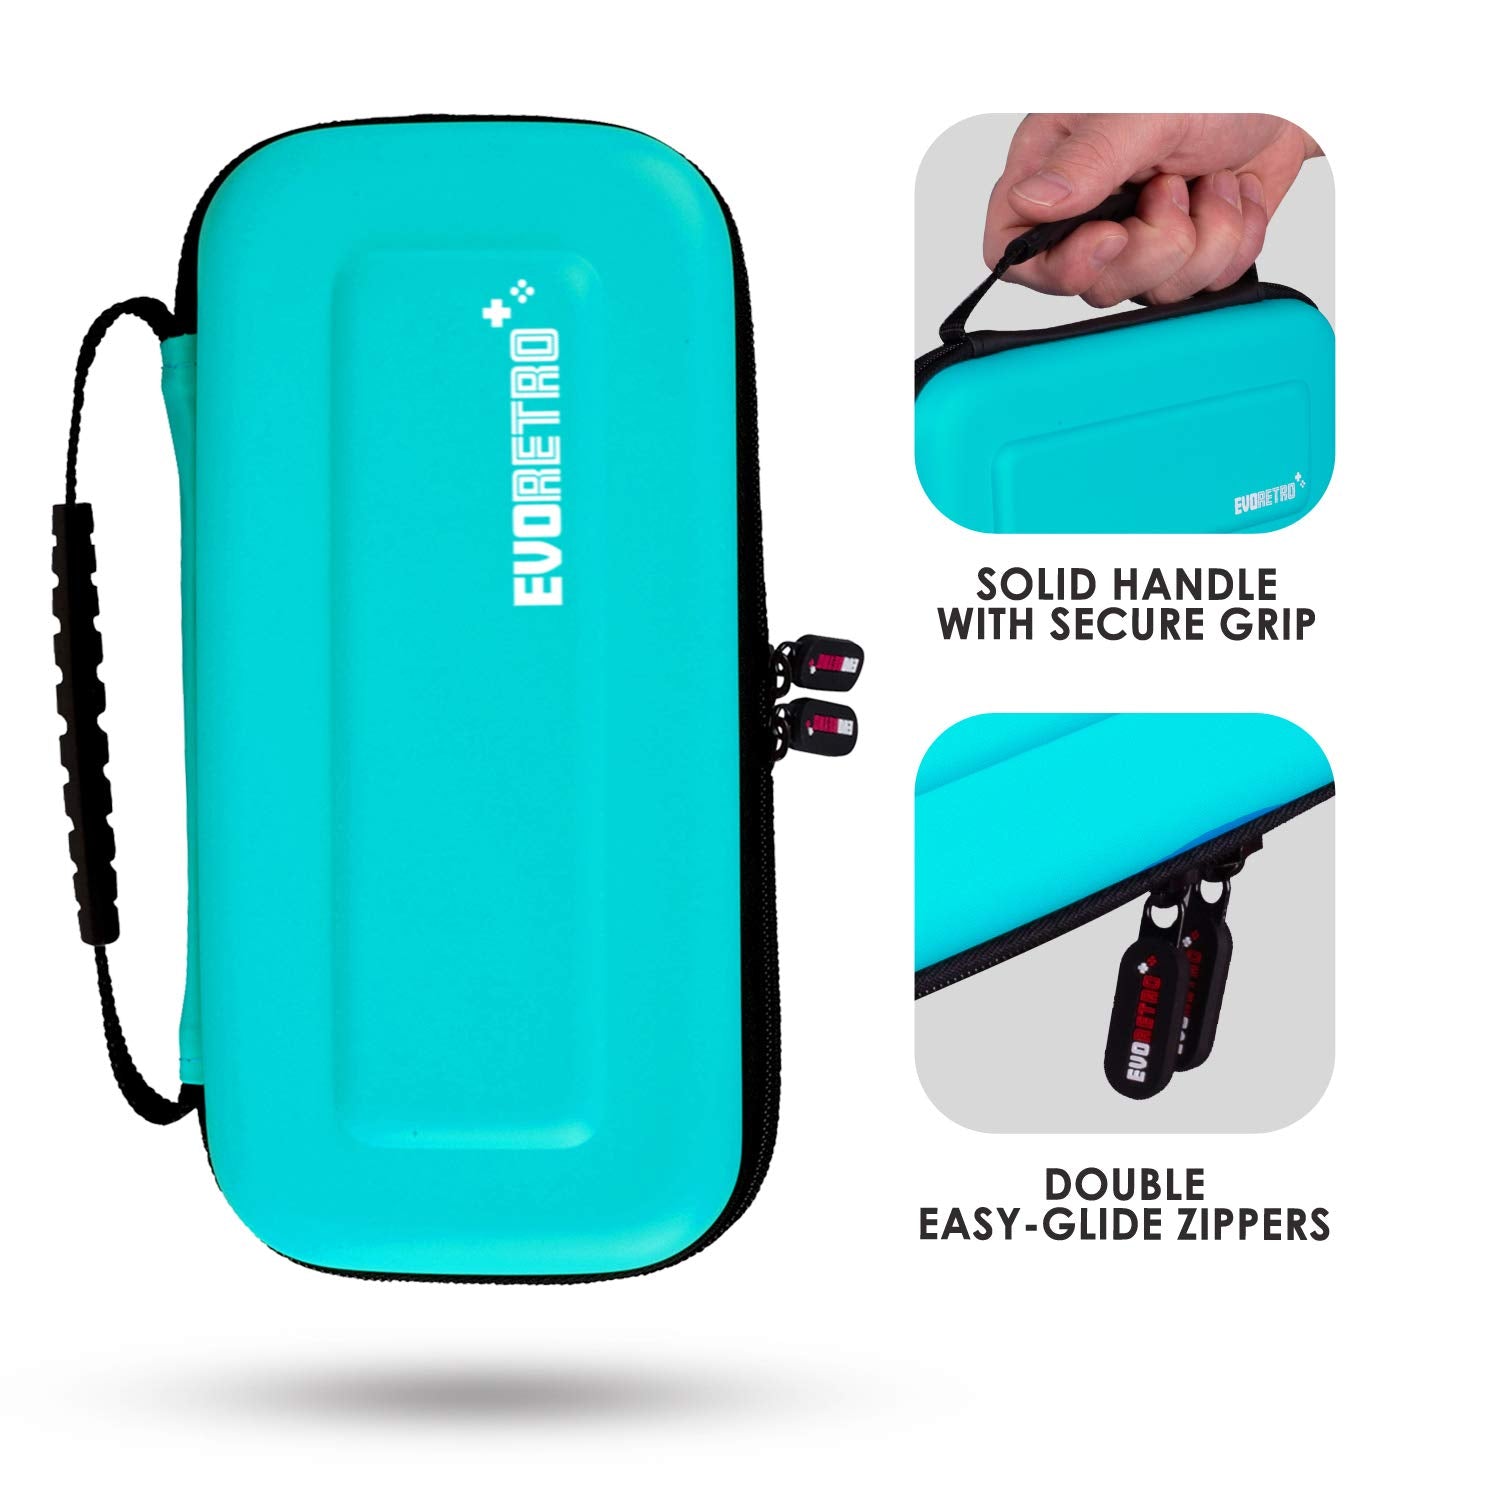 Stealth Travel Case for Nintendo Switch Lite (Turquoise)